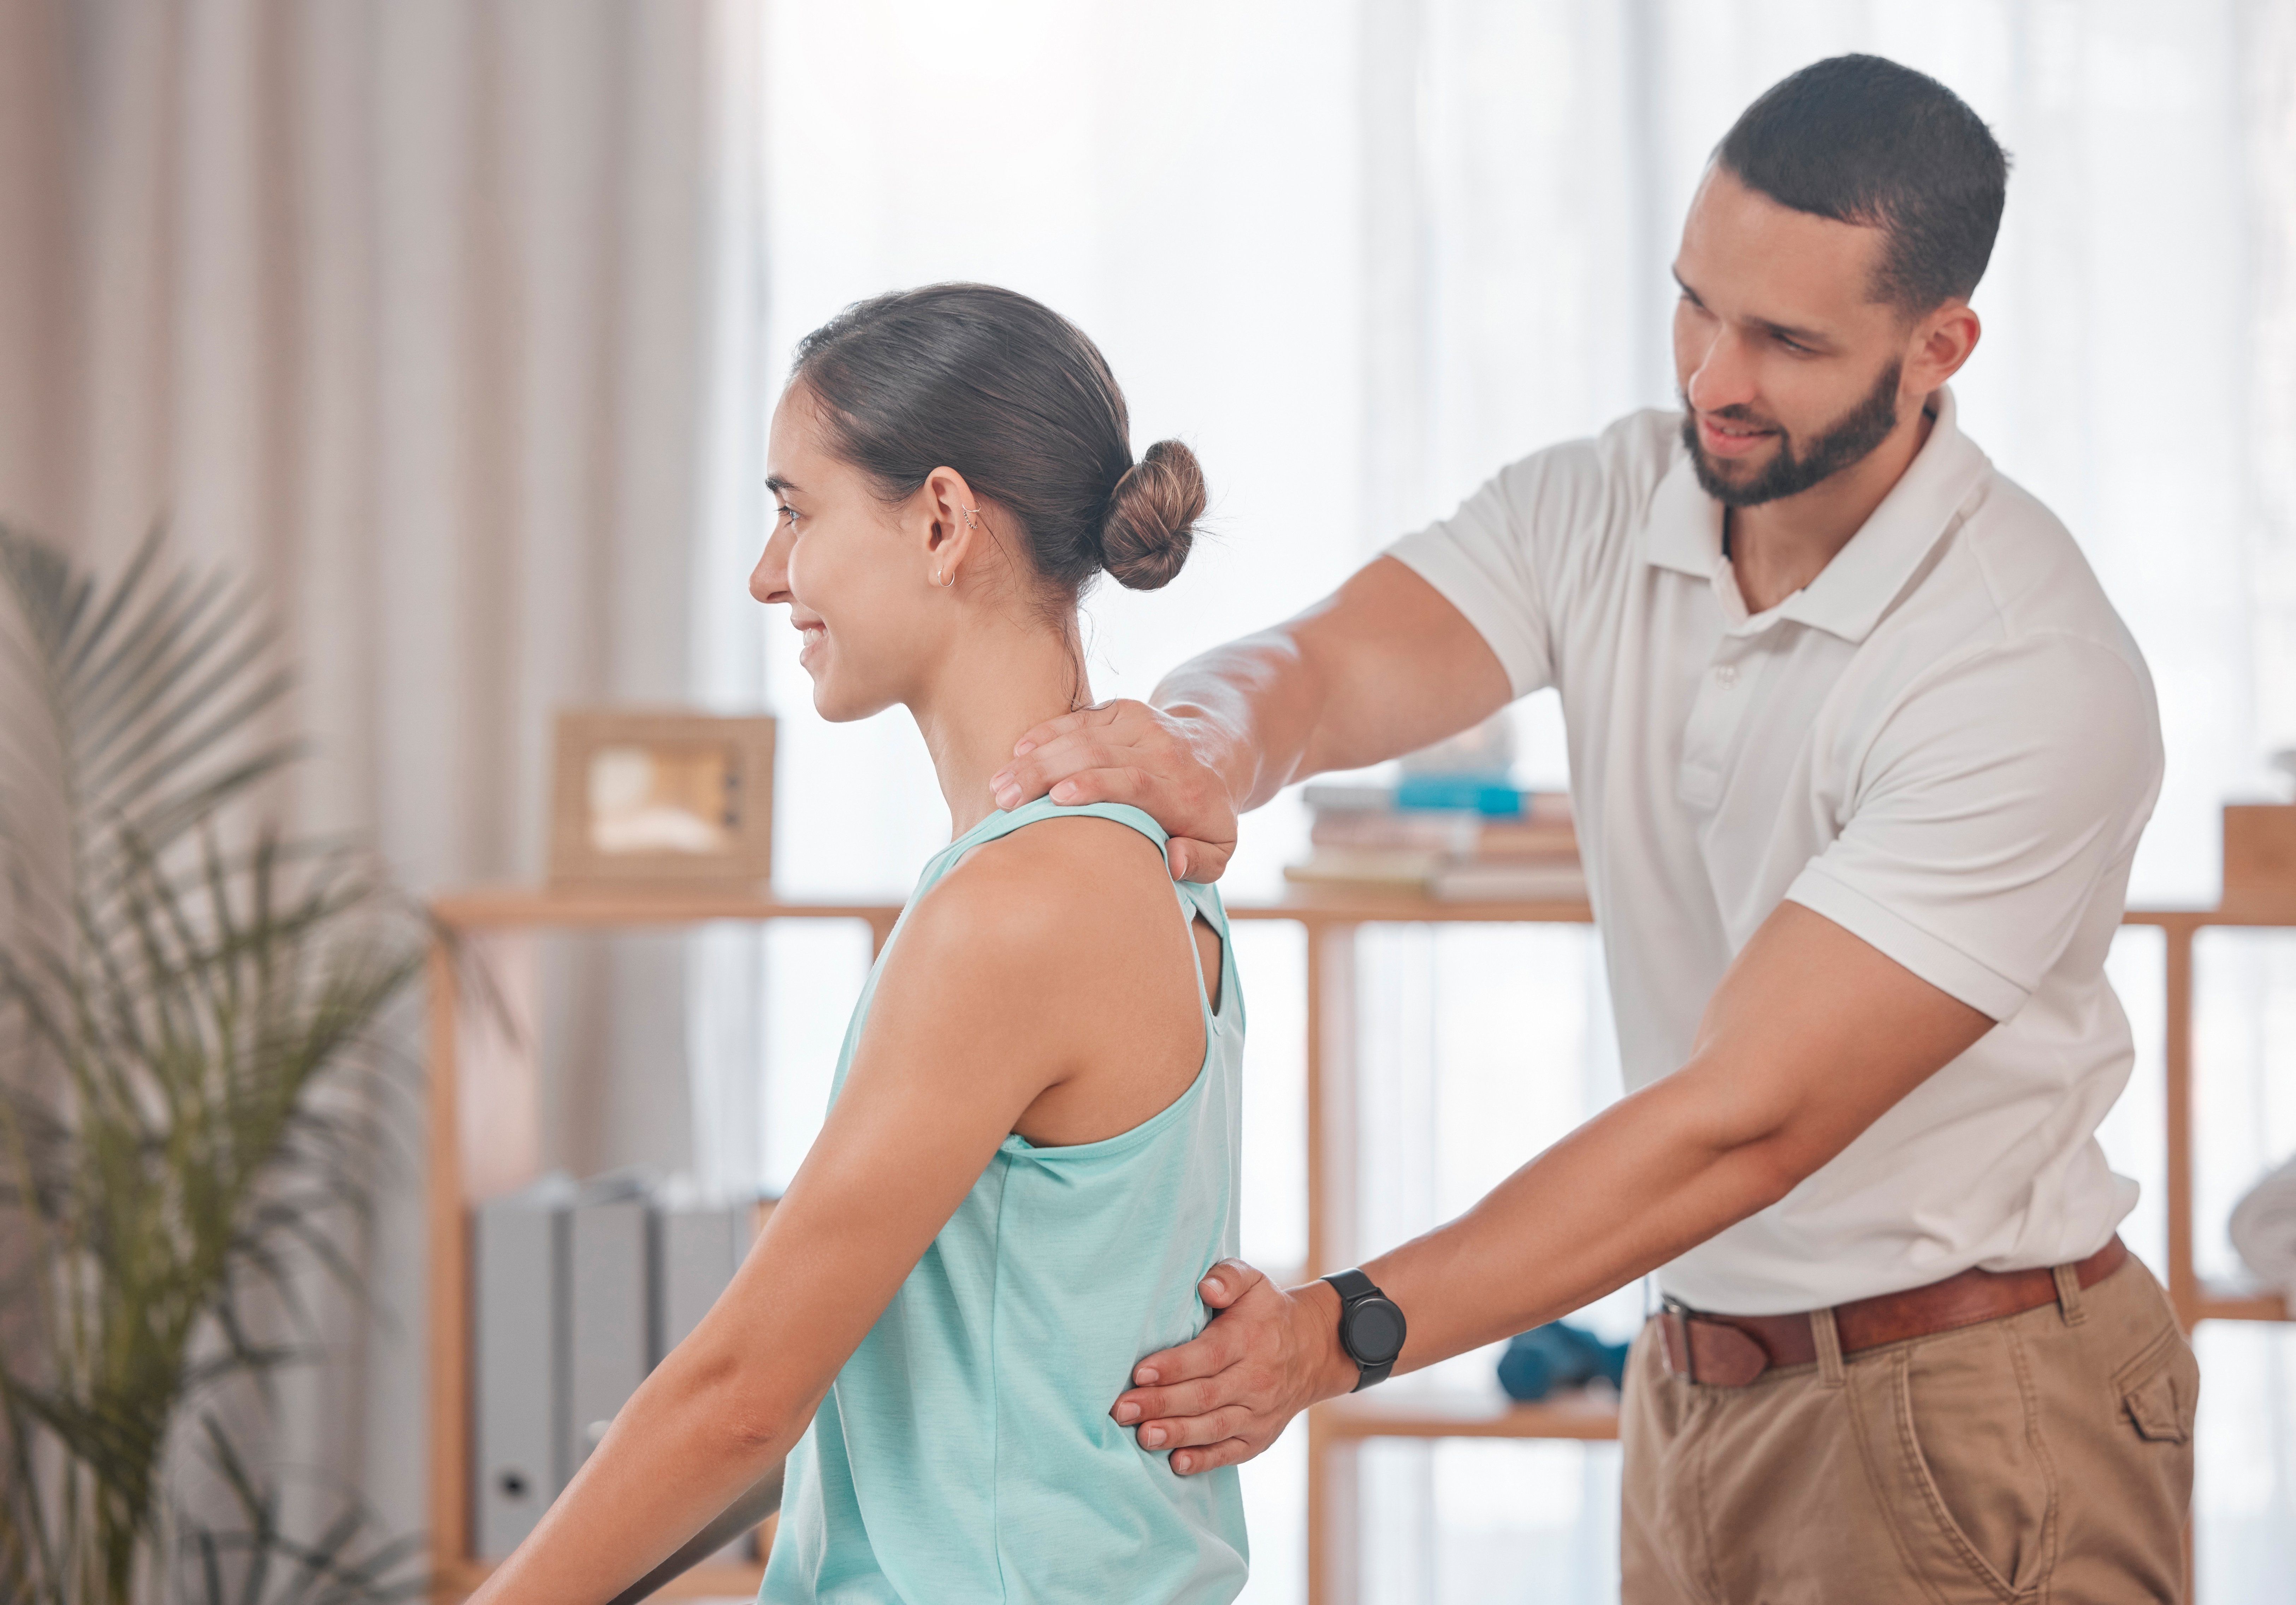 How to Best Preserve Results of Your Chiropractic Care